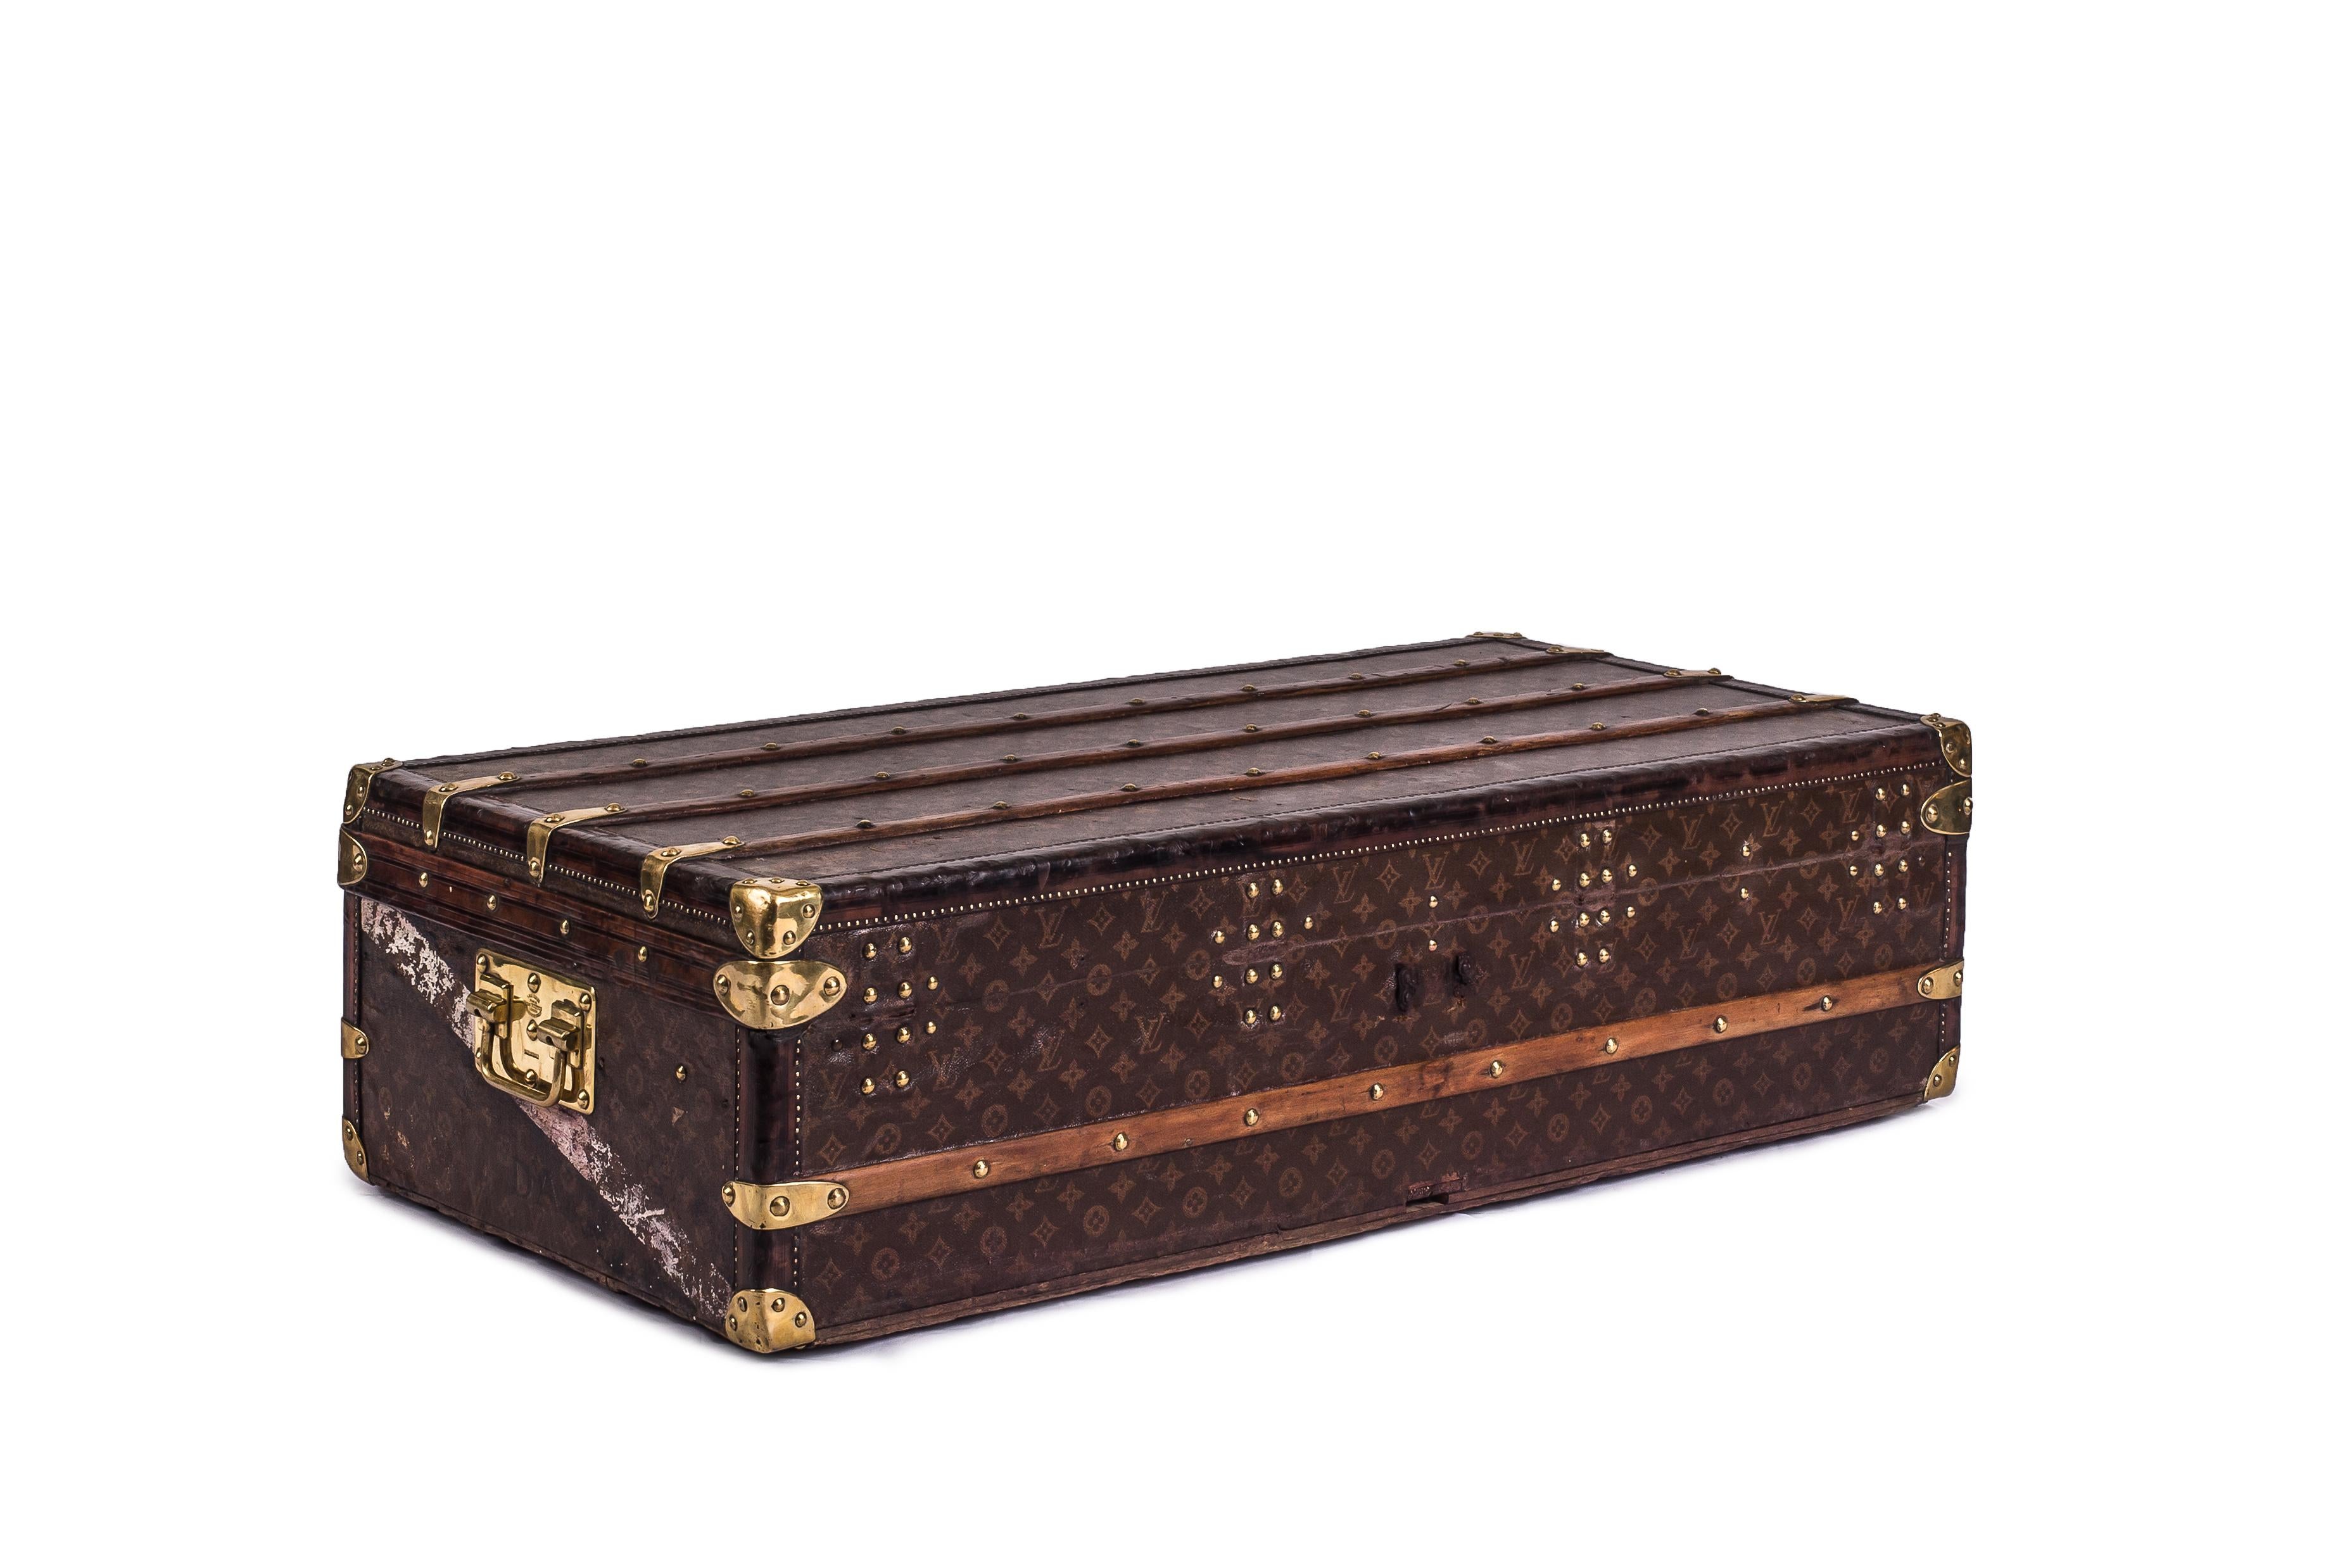 French 1920s Louis Vuitton Monogram Large Cabin Trunk